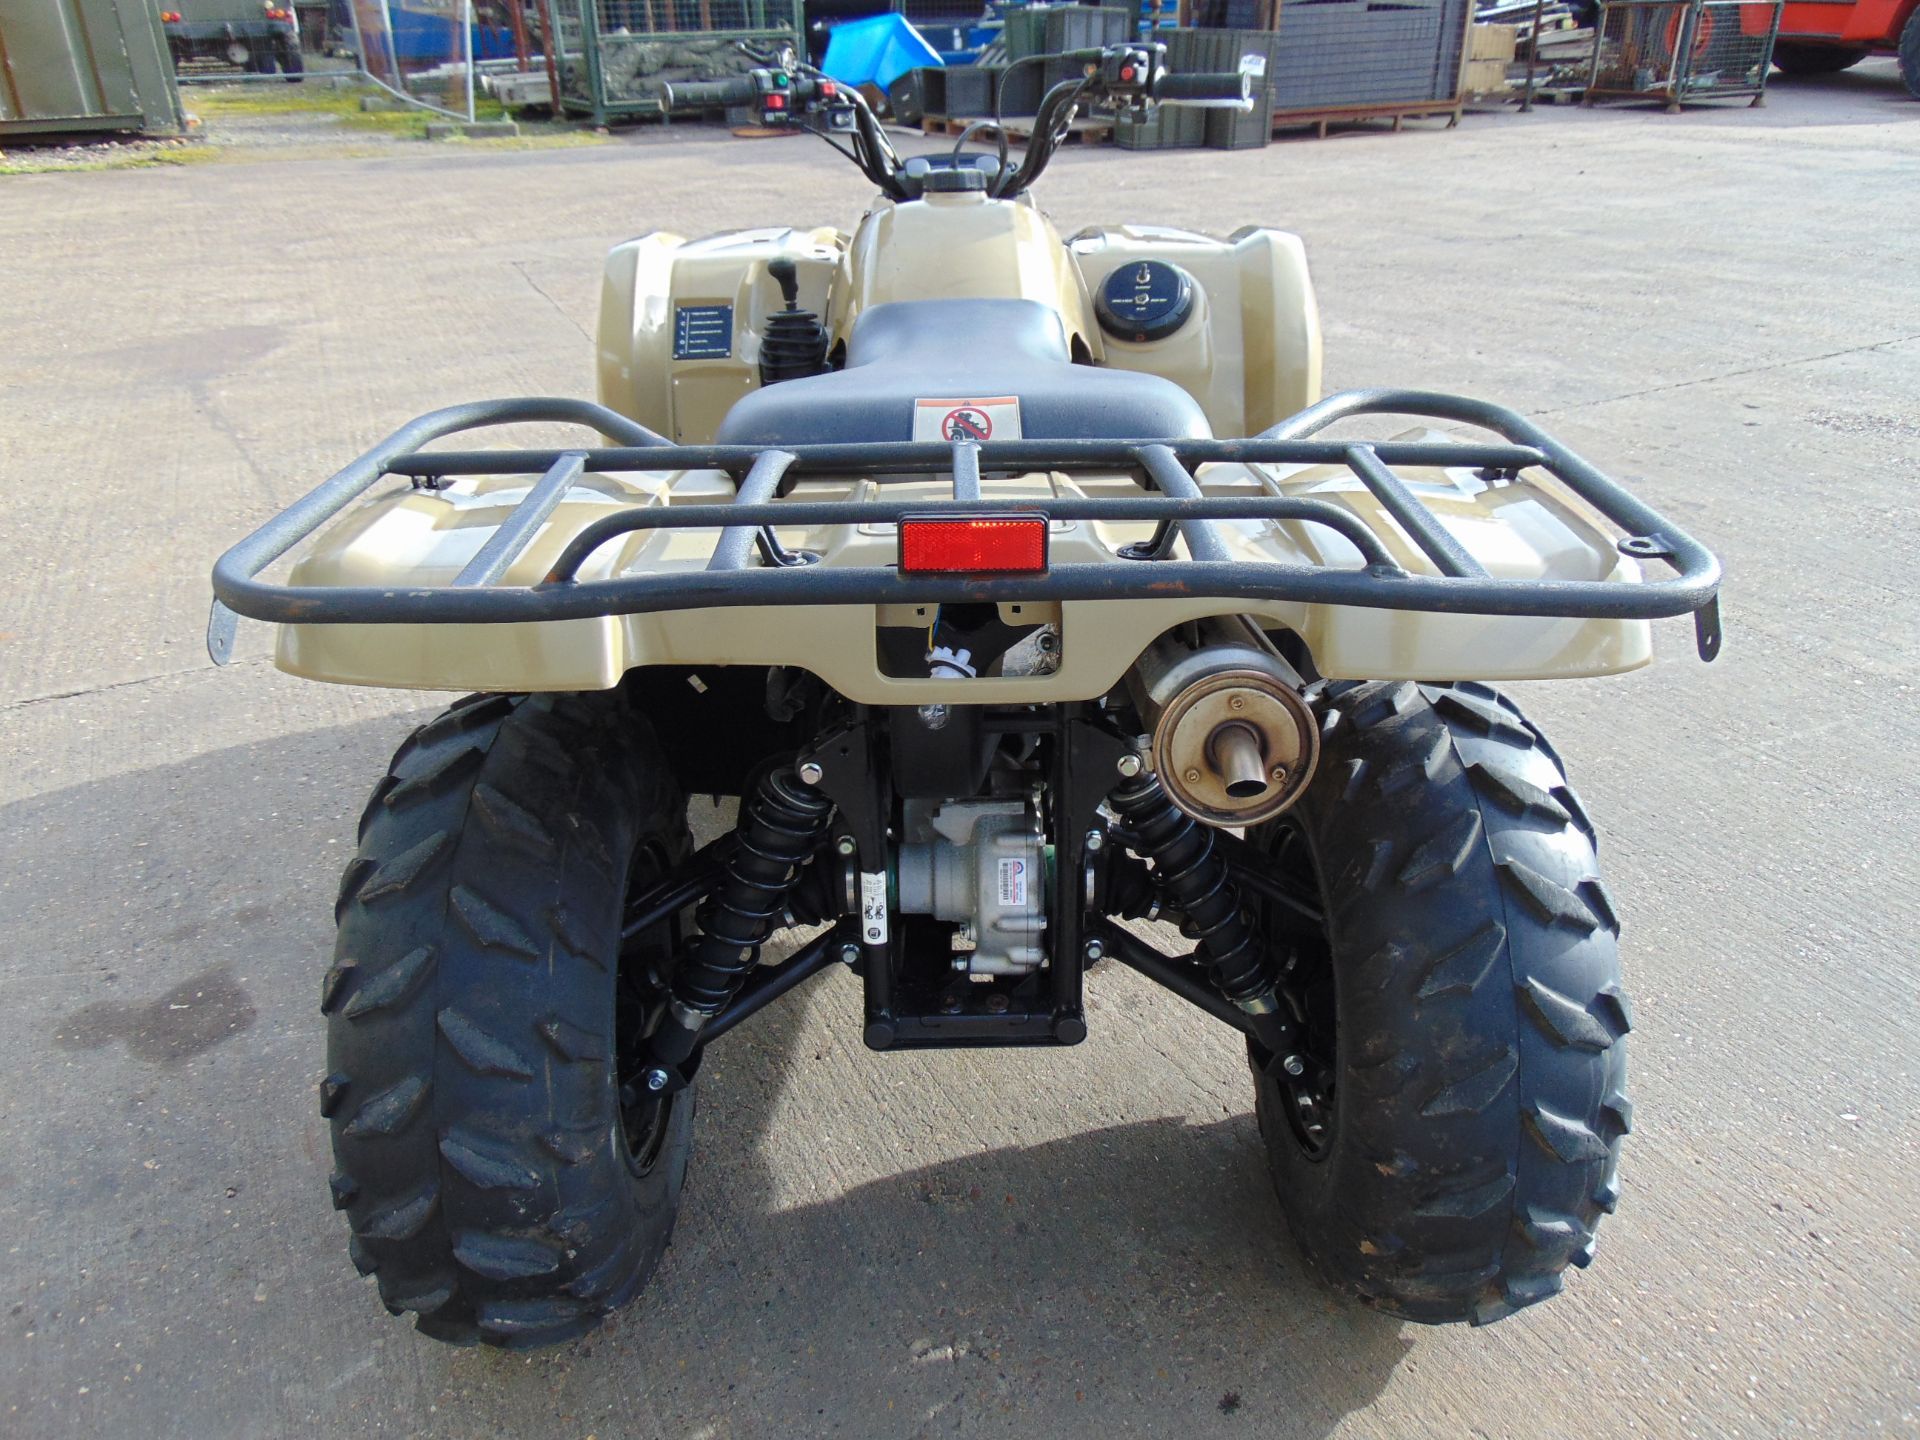 Recent Release Military Specification Yamaha Grizzly 450 4 x 4 ATV Quad Bike ONLY 75 Miles!!! - Image 8 of 24